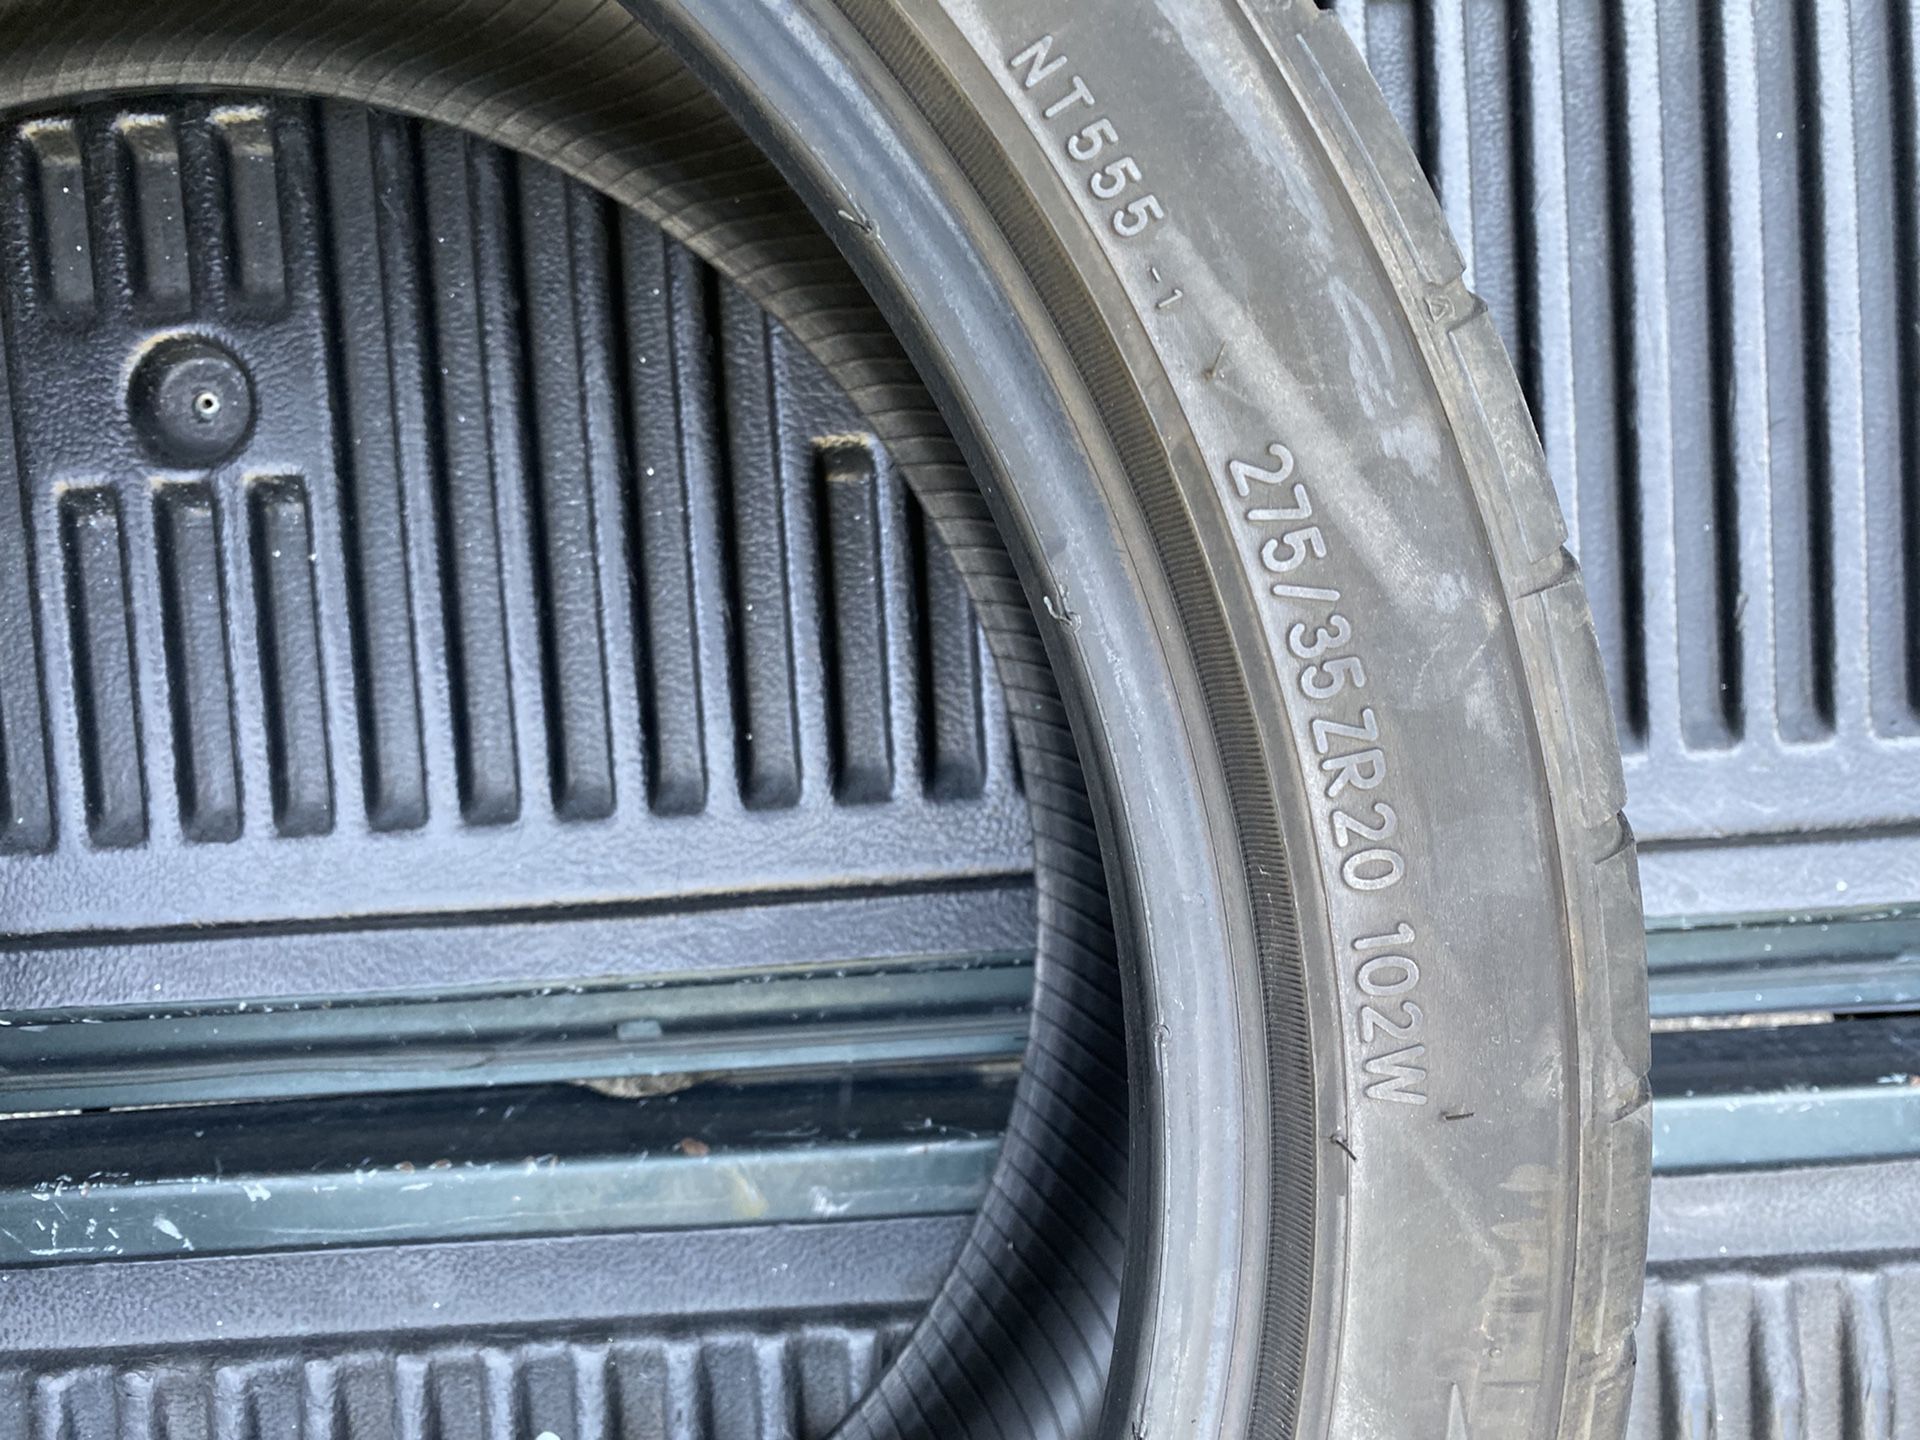 Nitto nt555 20inch tire 275/35/20